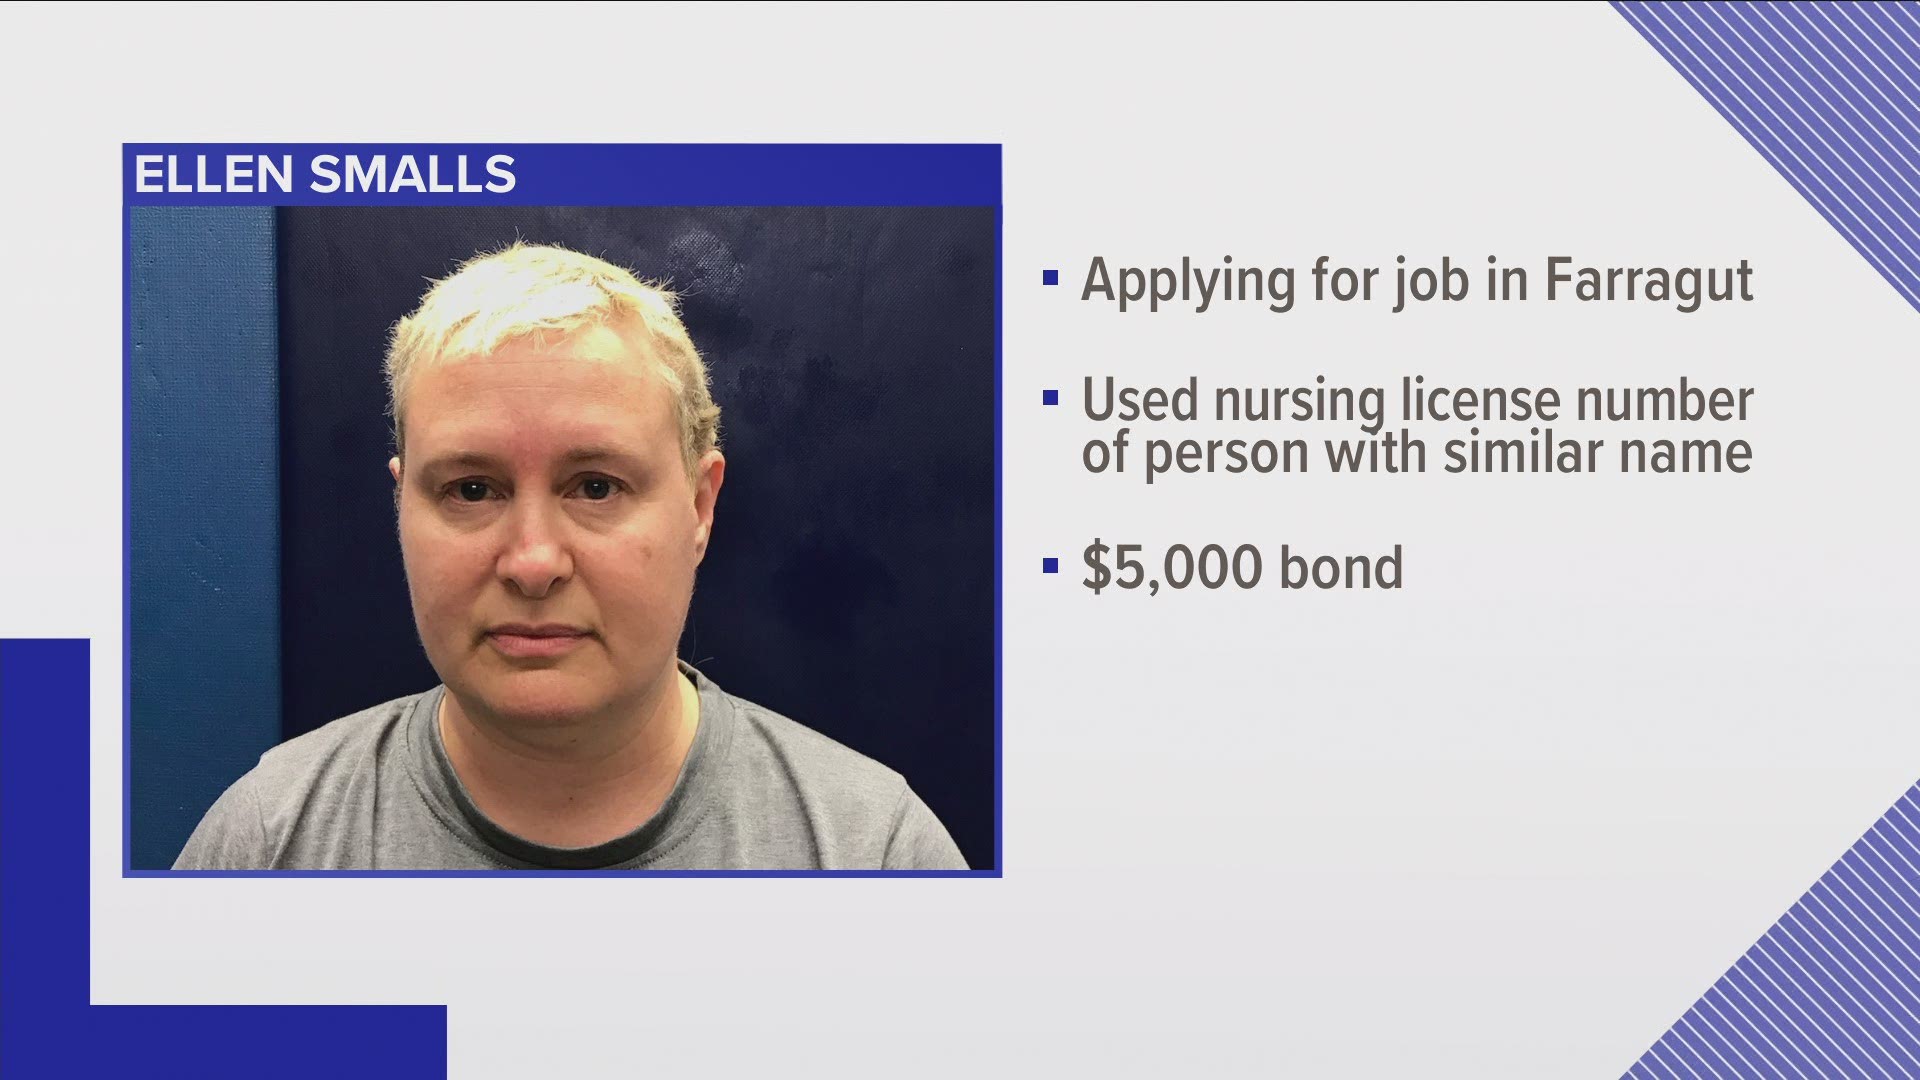 The Tennessee Bureau of Investigation said a woman was applying for a position in Farragut and used the license number of a person with a similar name.